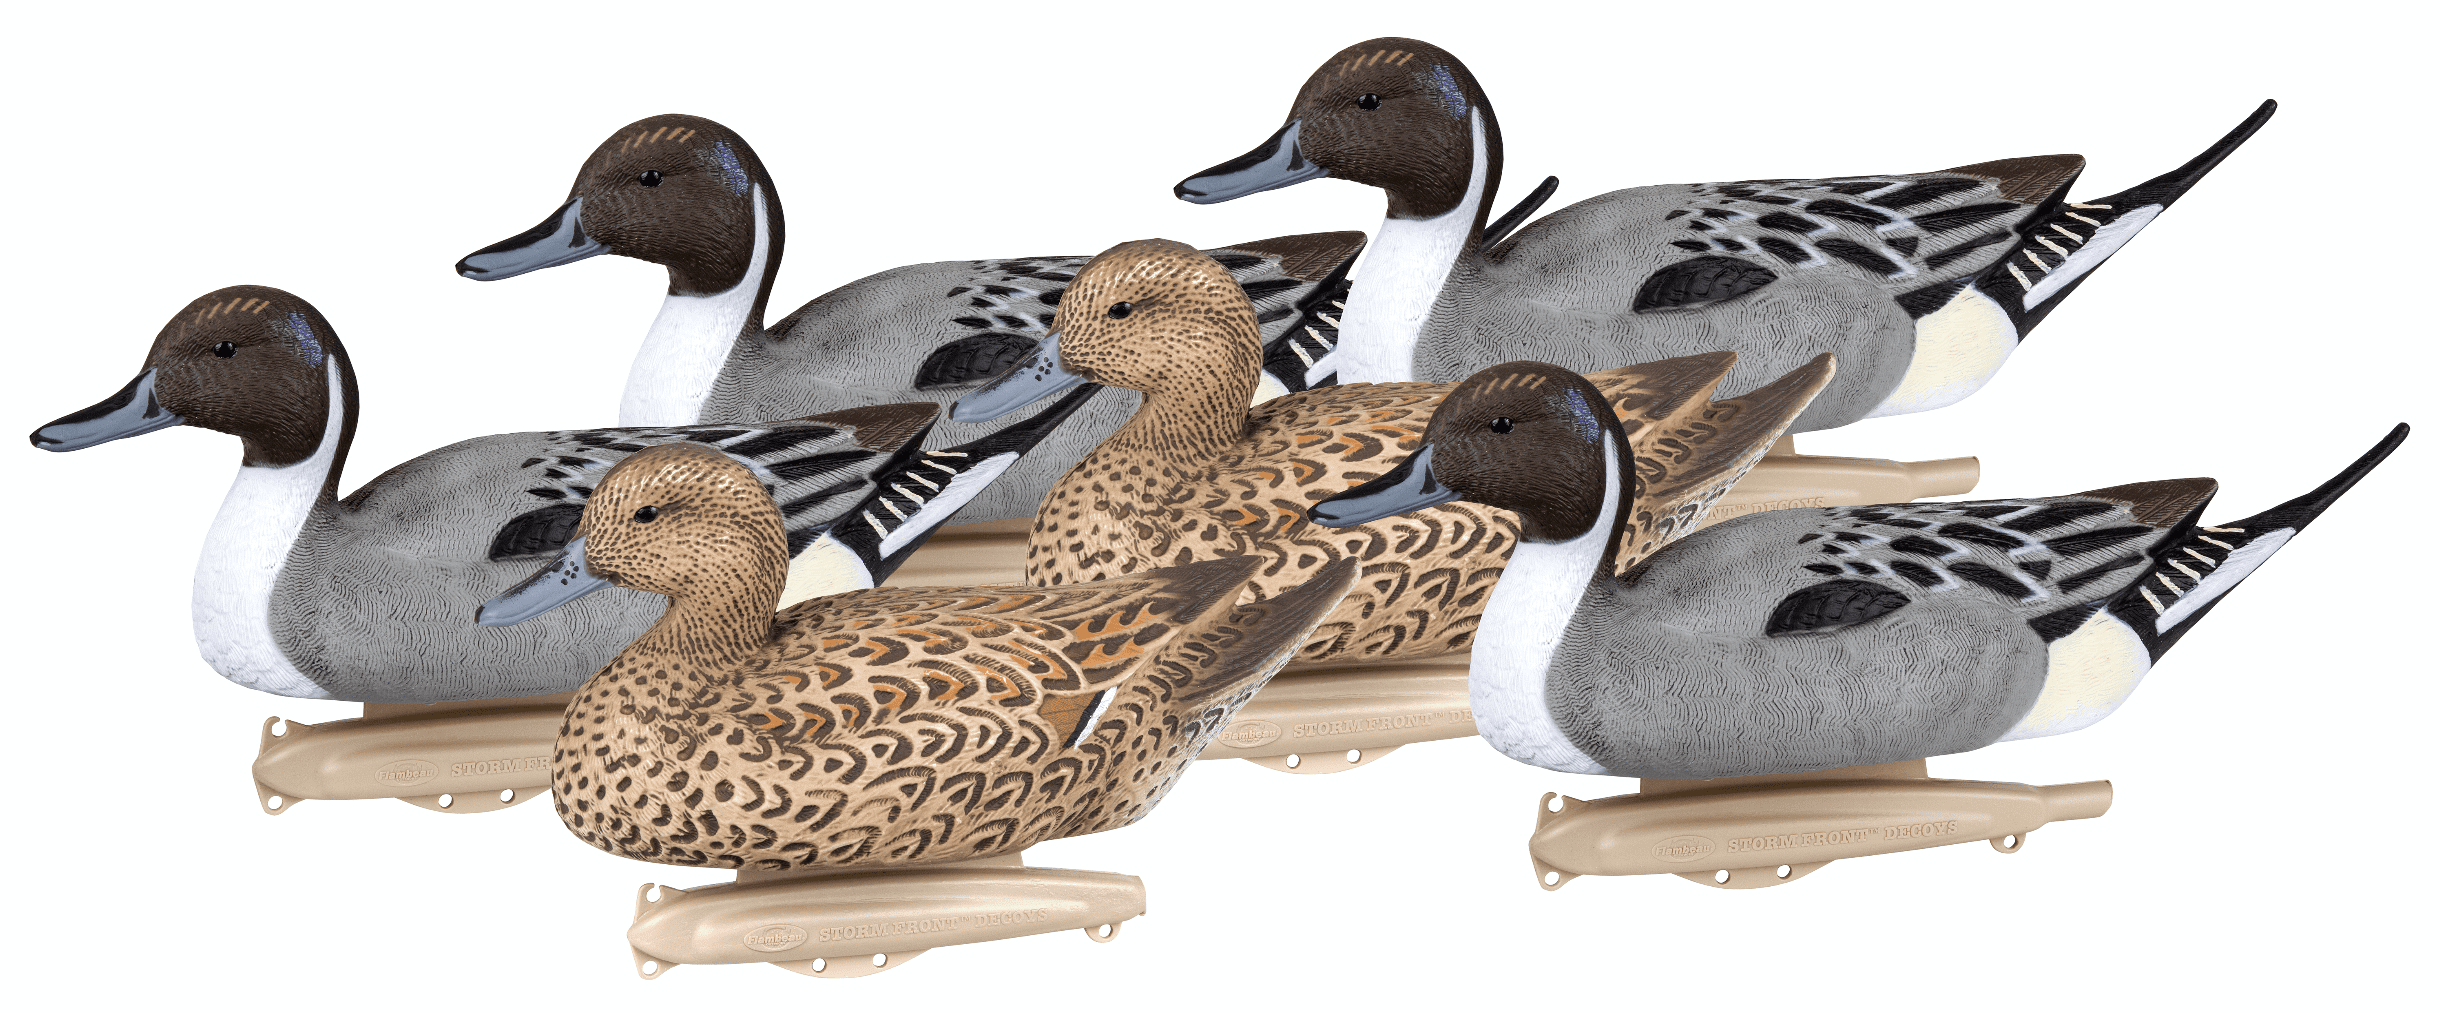 Green Winged Teal Duck High Quality Printed Vinyl Decal Wall Window Car Sticker